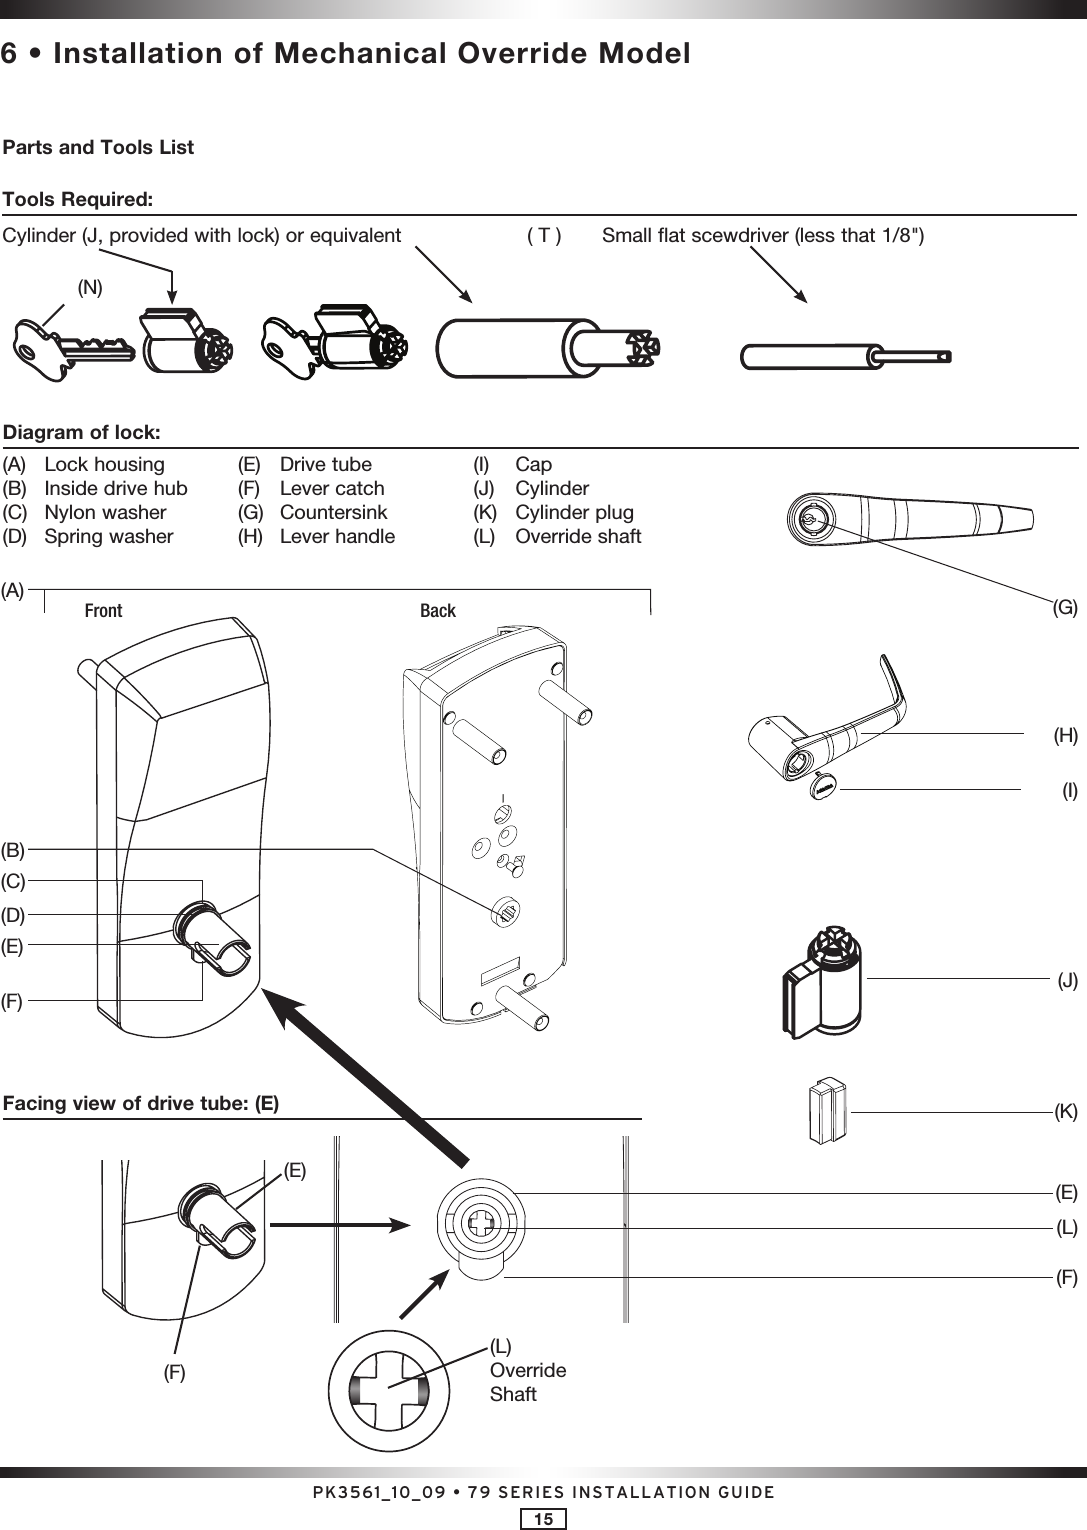 PK3561_10_09 • 79 SERIES INSTALLATION GUIDE156 •  Installation of Mechanical Override Model(E)(L)OverrideShaftParts and Tools ListTools Required:Cylinder (J, provided with lock) or equivalent    ( T )  Small flat scewdriver (less that 1/8&quot;)(A)  Lock housing(B)  Inside drive hub(C)  Nylon washer(D)  Spring washer(E)  Drive tube(F)   Lever catch(G)   Countersink (H)   Lever handle(I)   Cap(J)   Cylinder (K)   Cylinder plug (L)   Override shaftDiagram of lock:Facing view of drive tube: (E)BackFront(A)(H)(E)(B)(D)(F)(I)(J)(K)(E)(L)(F)(G)(C)(F)(N)